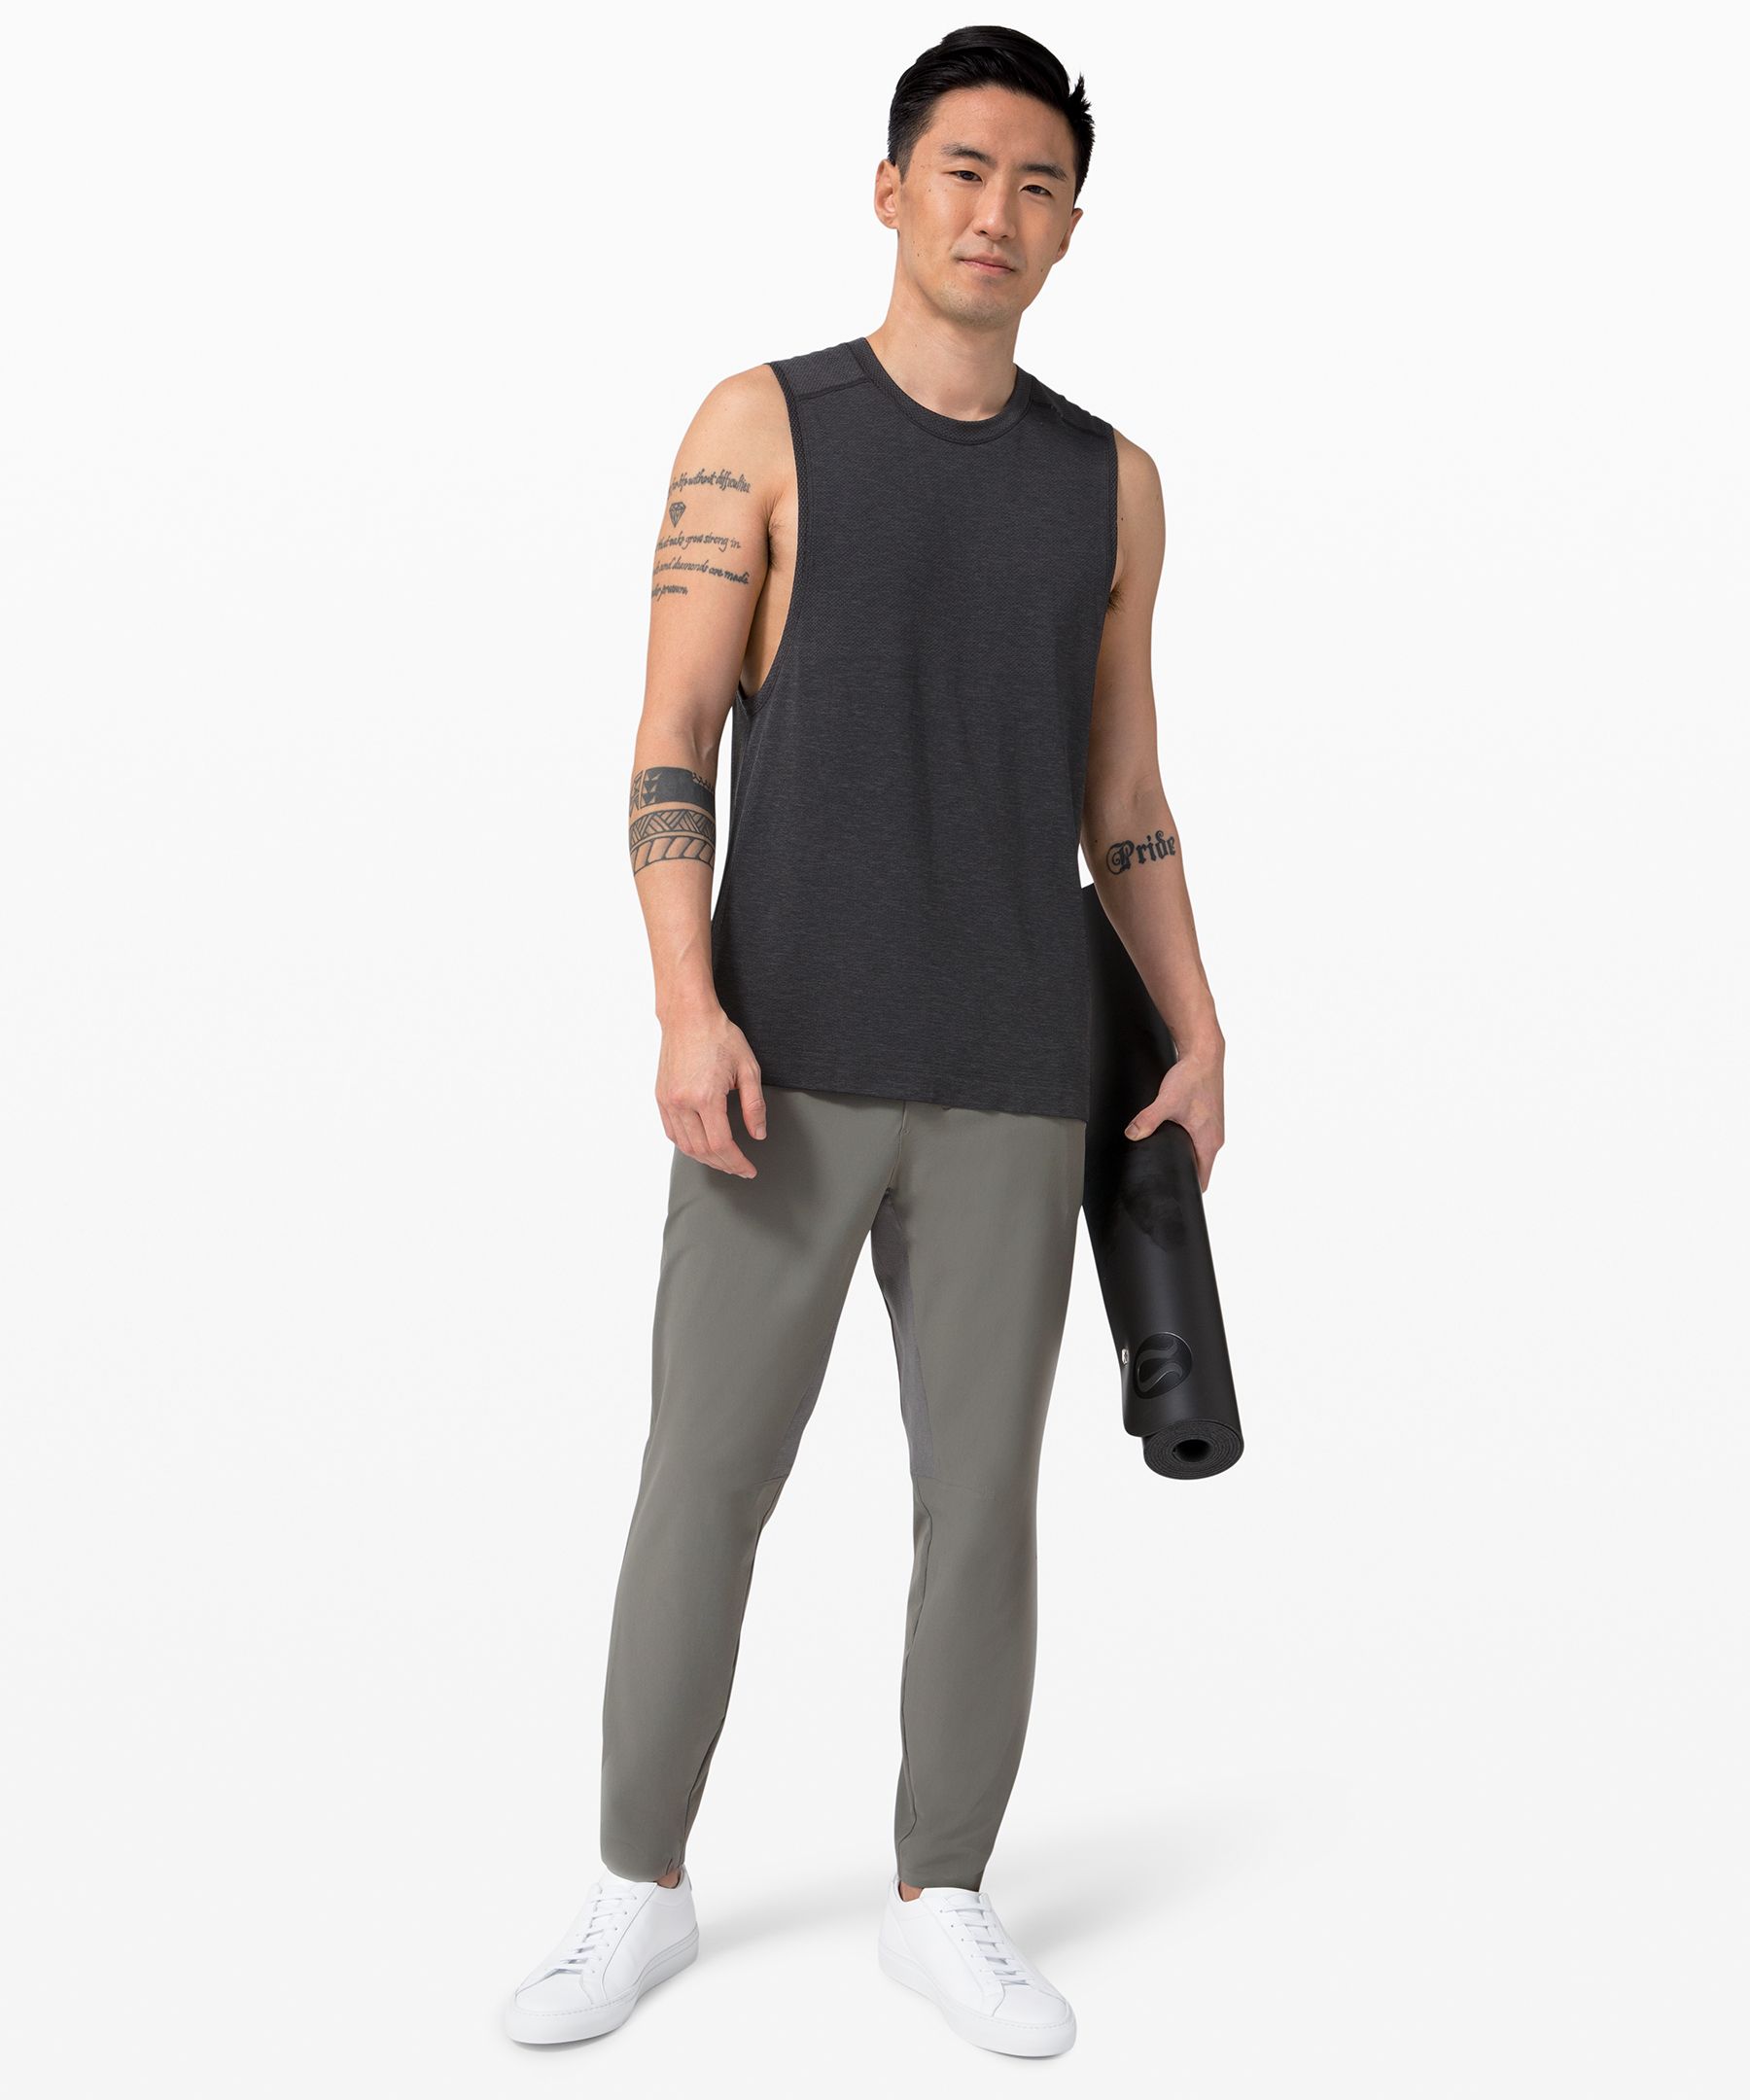 lululemon on the move pant review